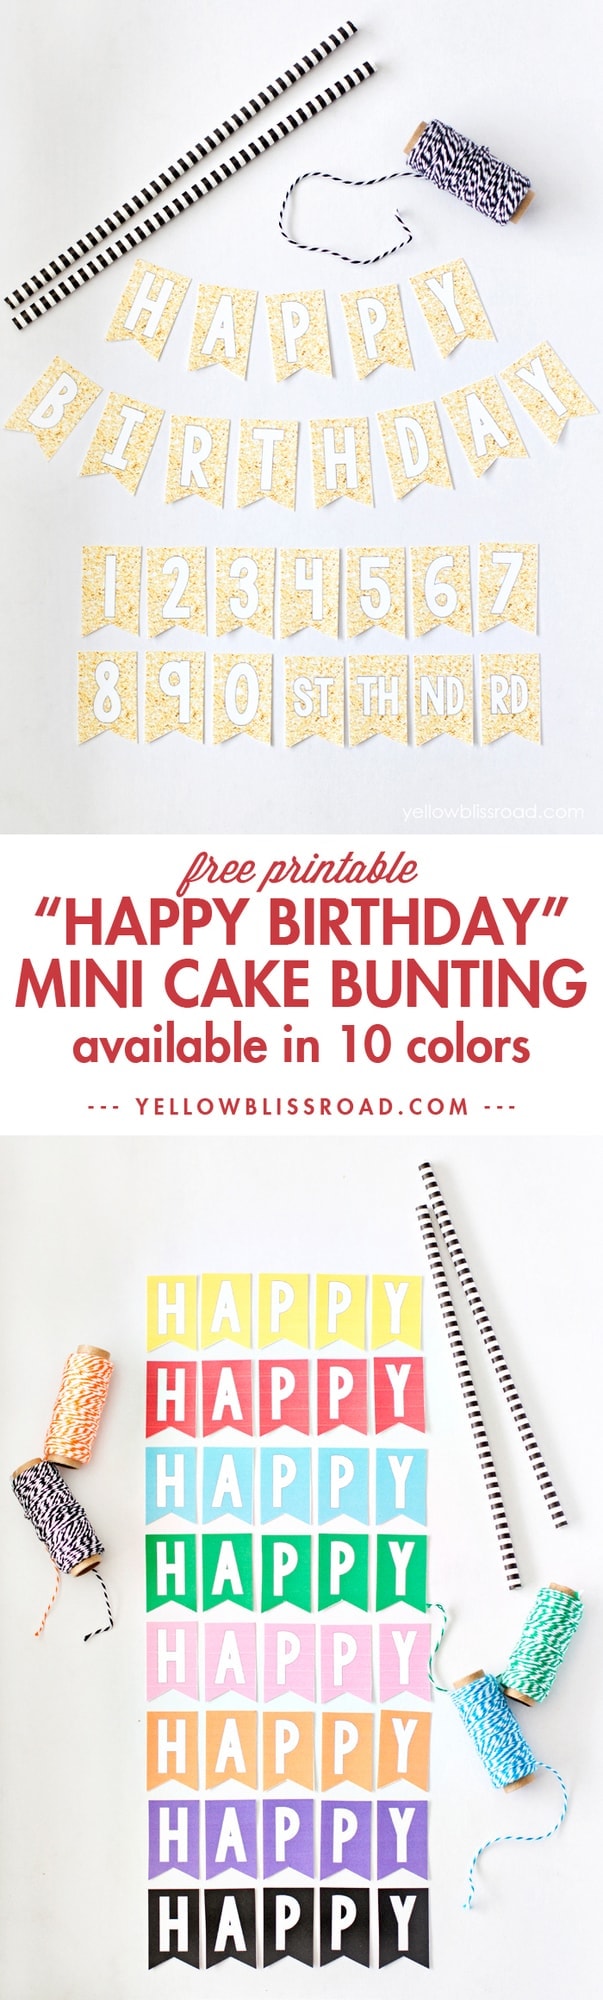 Free Printable Mini Birthday Cake Bunting in a variety of colors